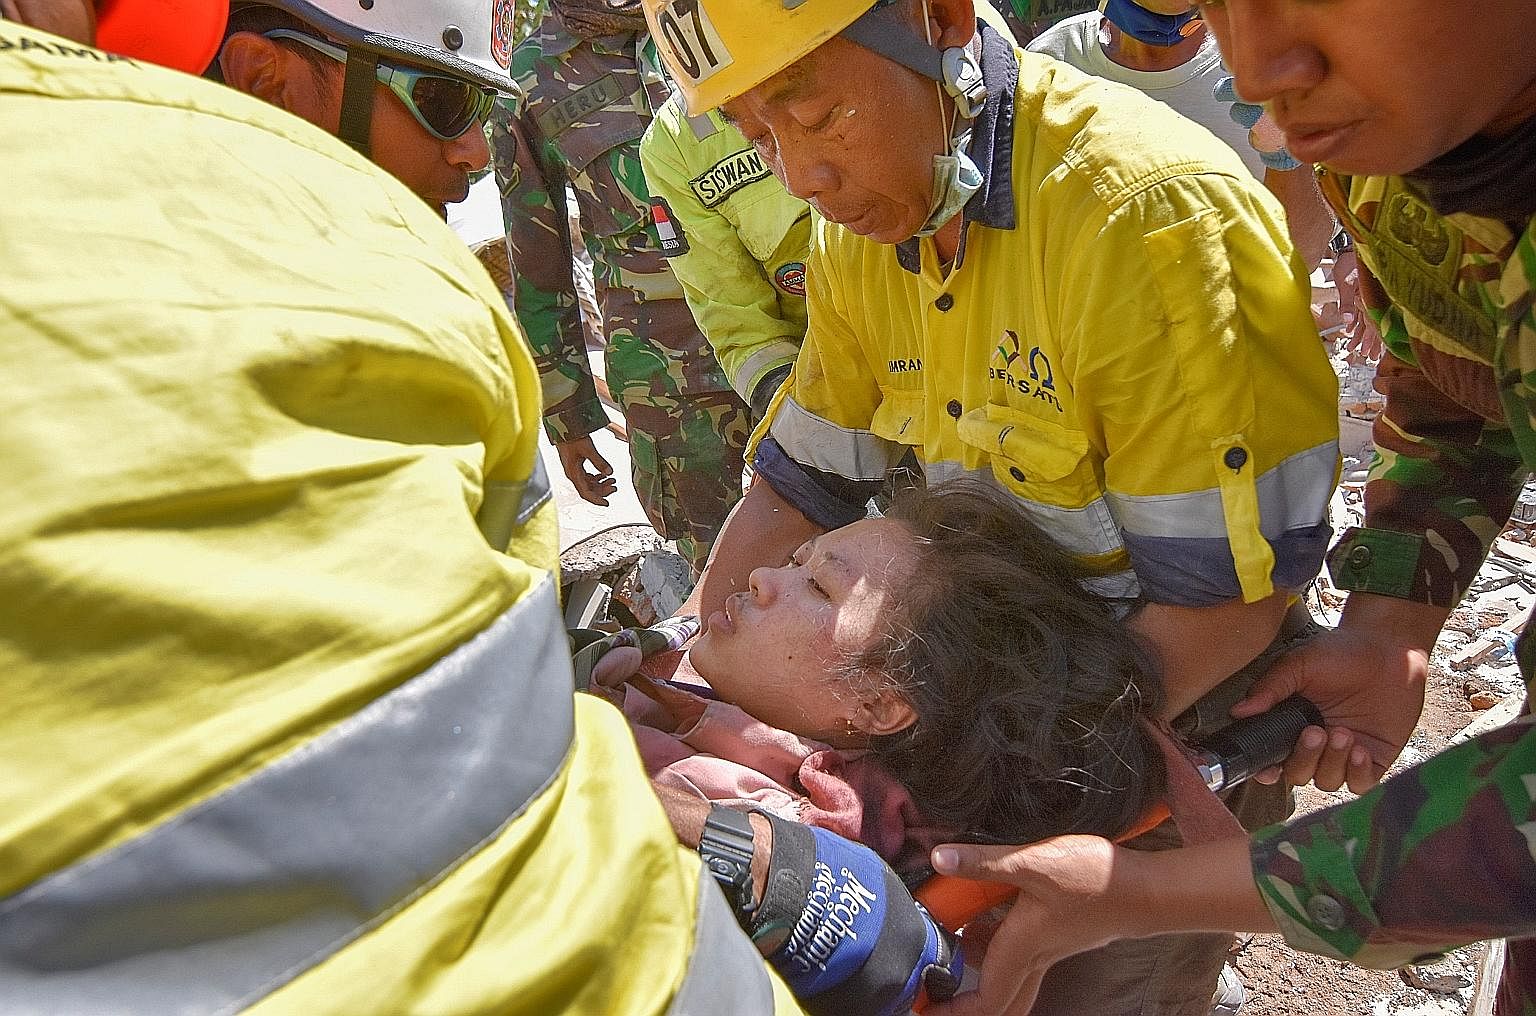 The death toll from a magnitude-7 earthquake that hit Indonesia's tourist island of Lombok on Sunday topped 100 yesterday as rescuers found victims under wrecked buildings, including this woman who survived two days under the rubble. The West Nusa Te